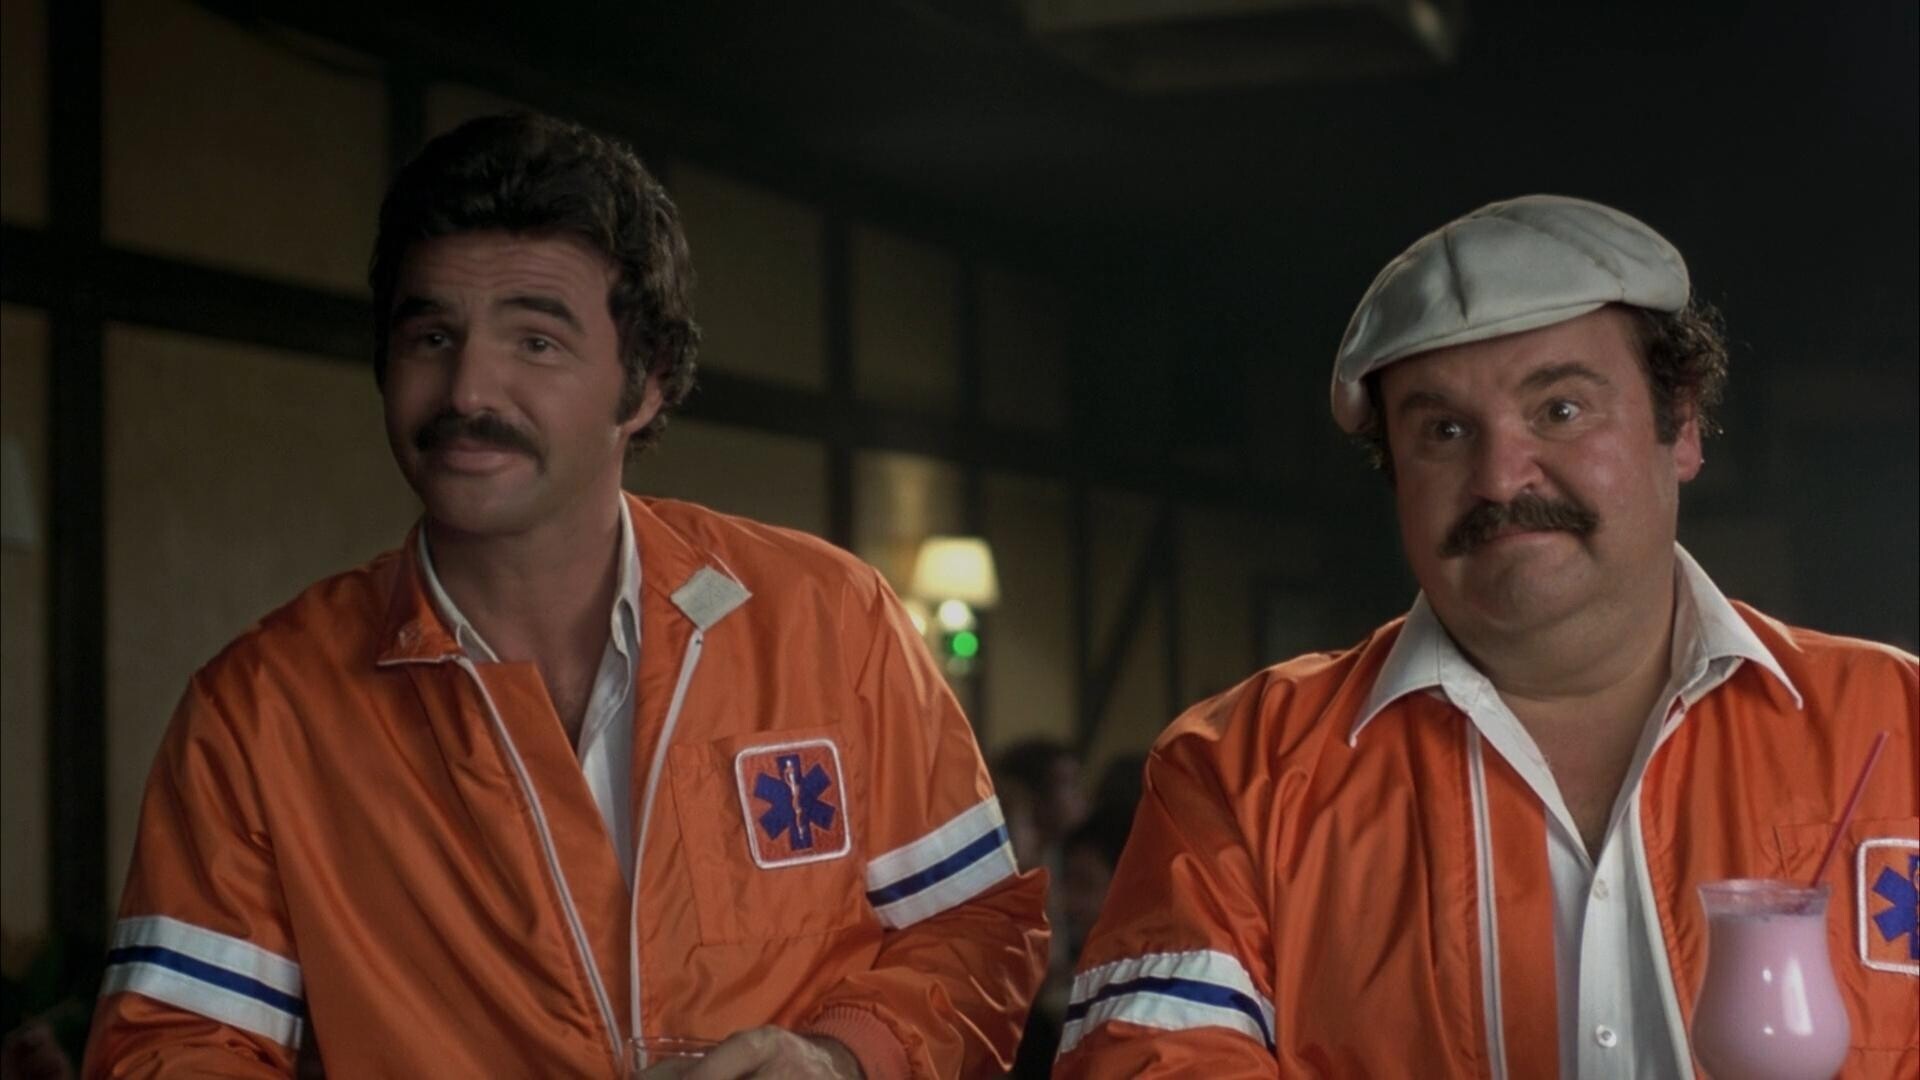 Burt Reynolds: The Cannonball Run, A 1981 action comedy film, Directed by Hal Needham, 20th Century Fox. 1920x1080 Full HD Wallpaper.